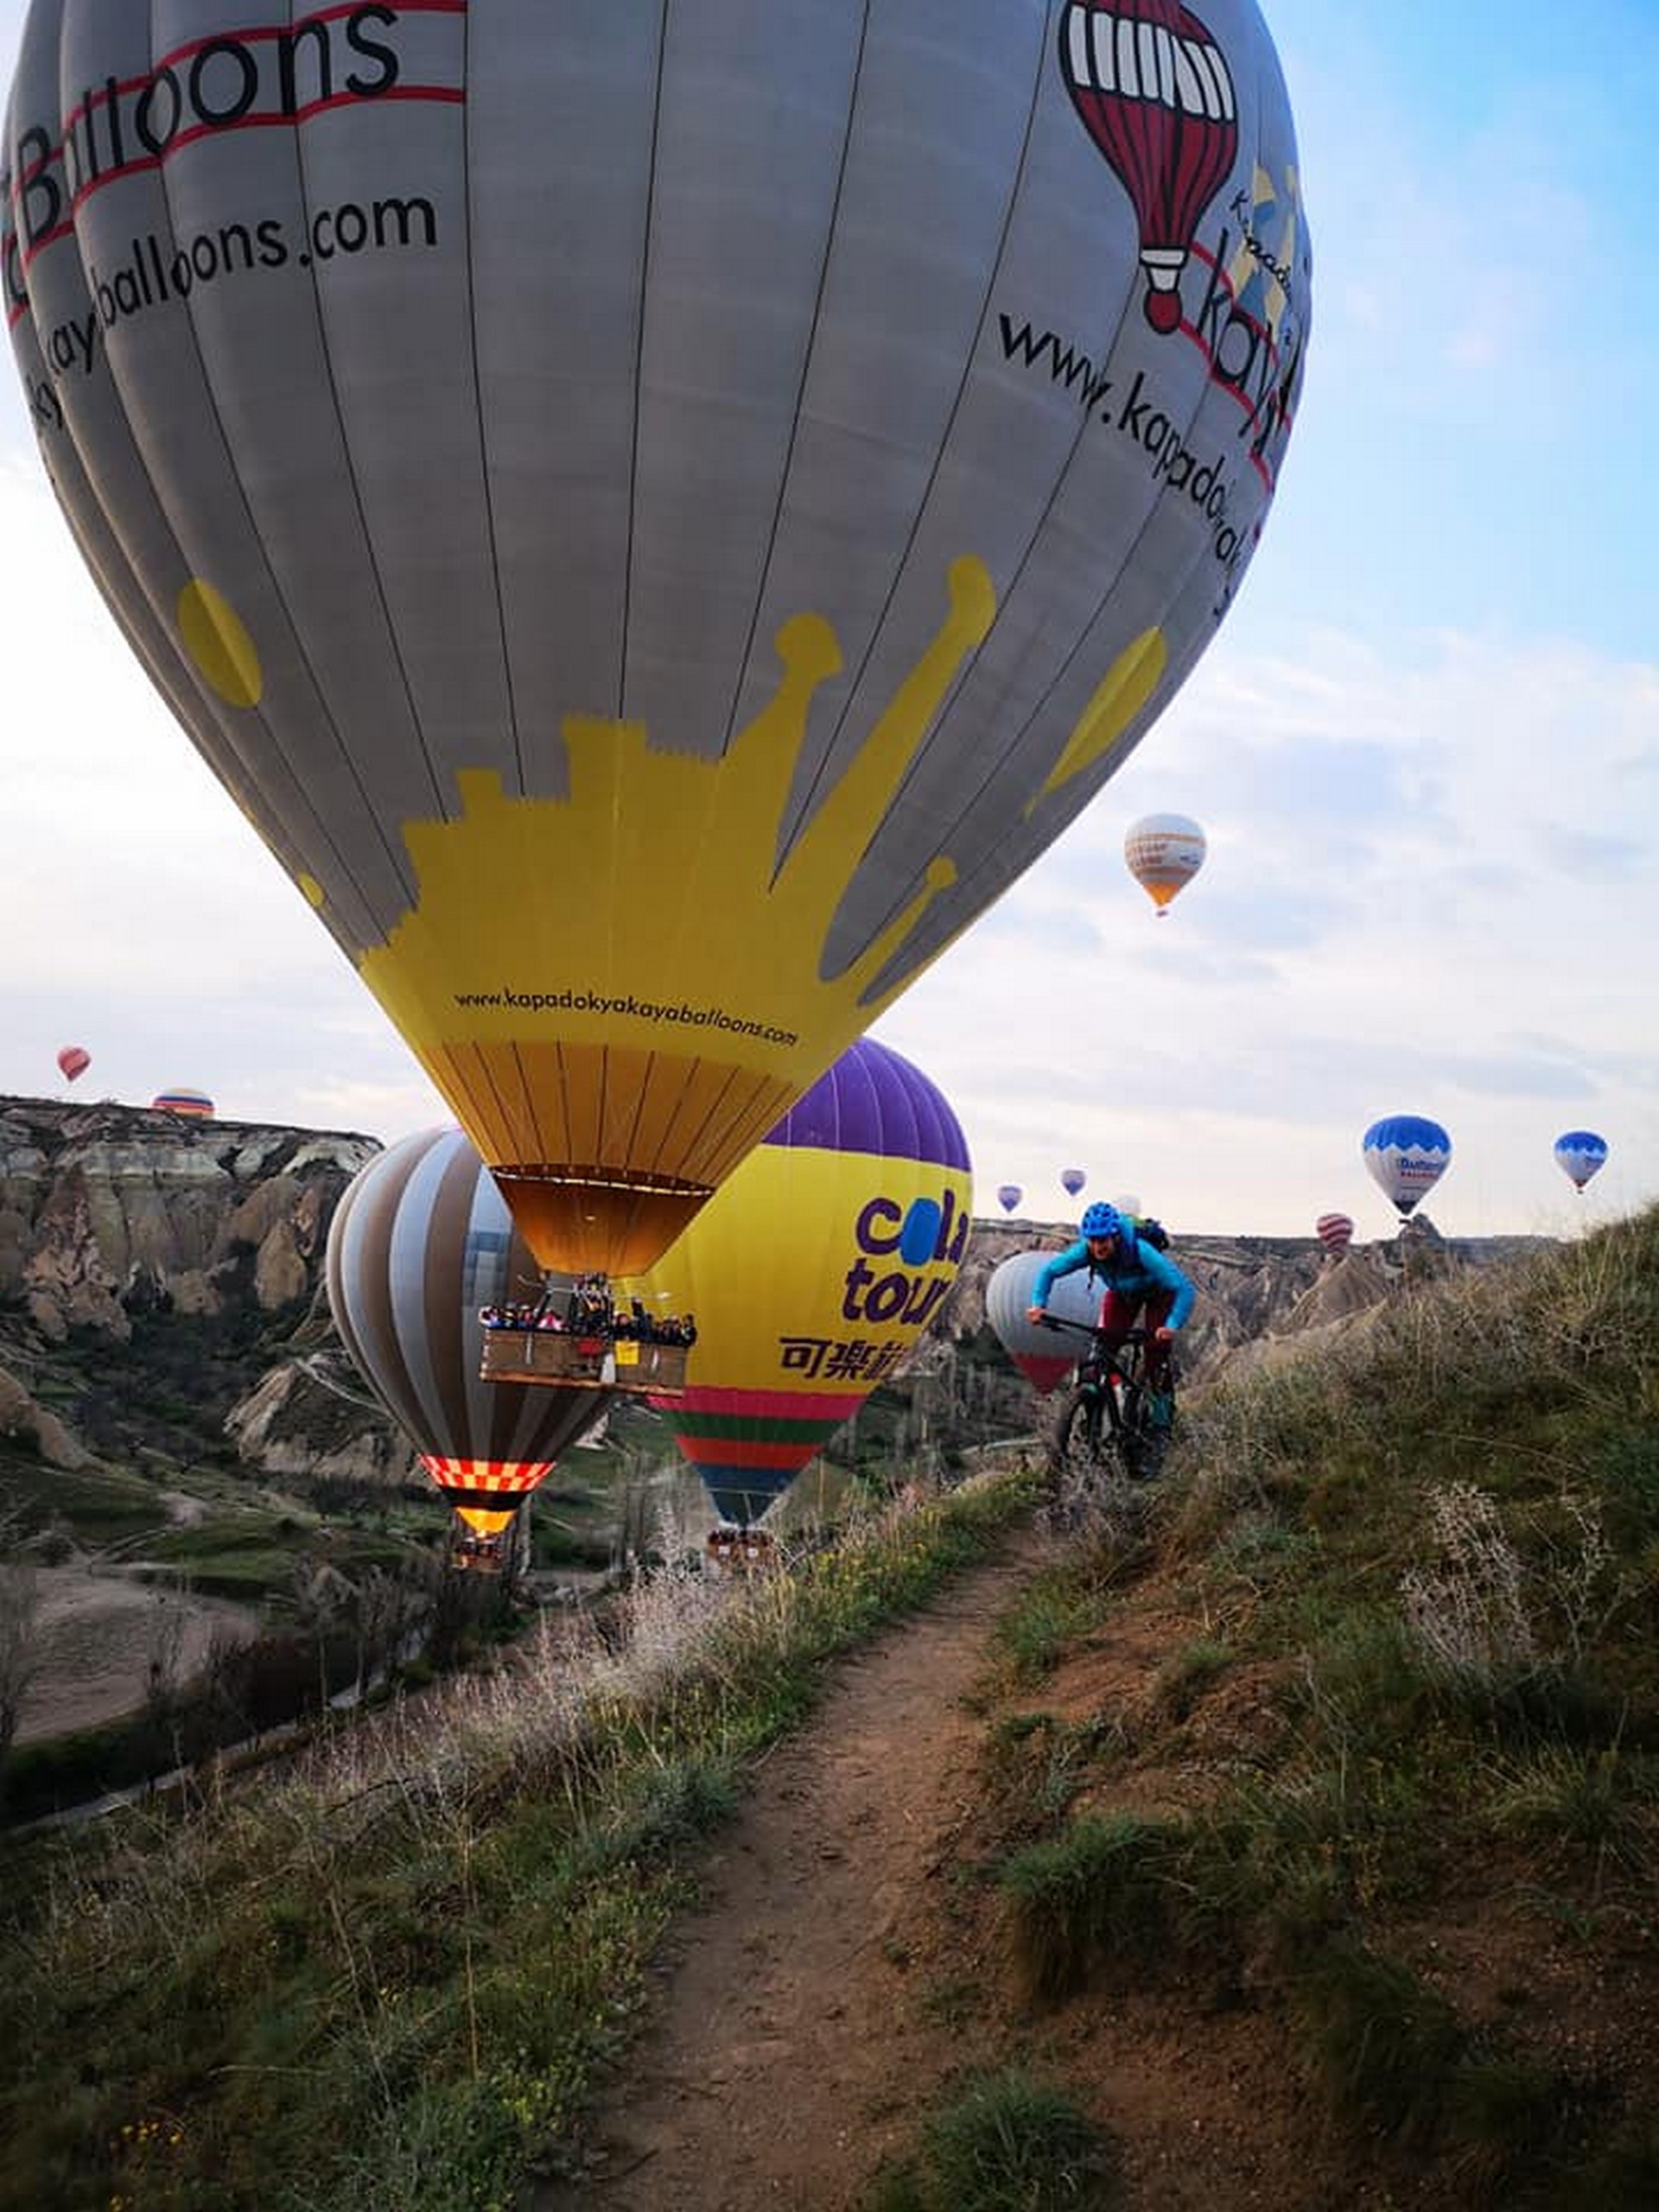 Biking in front of the hot air baloons